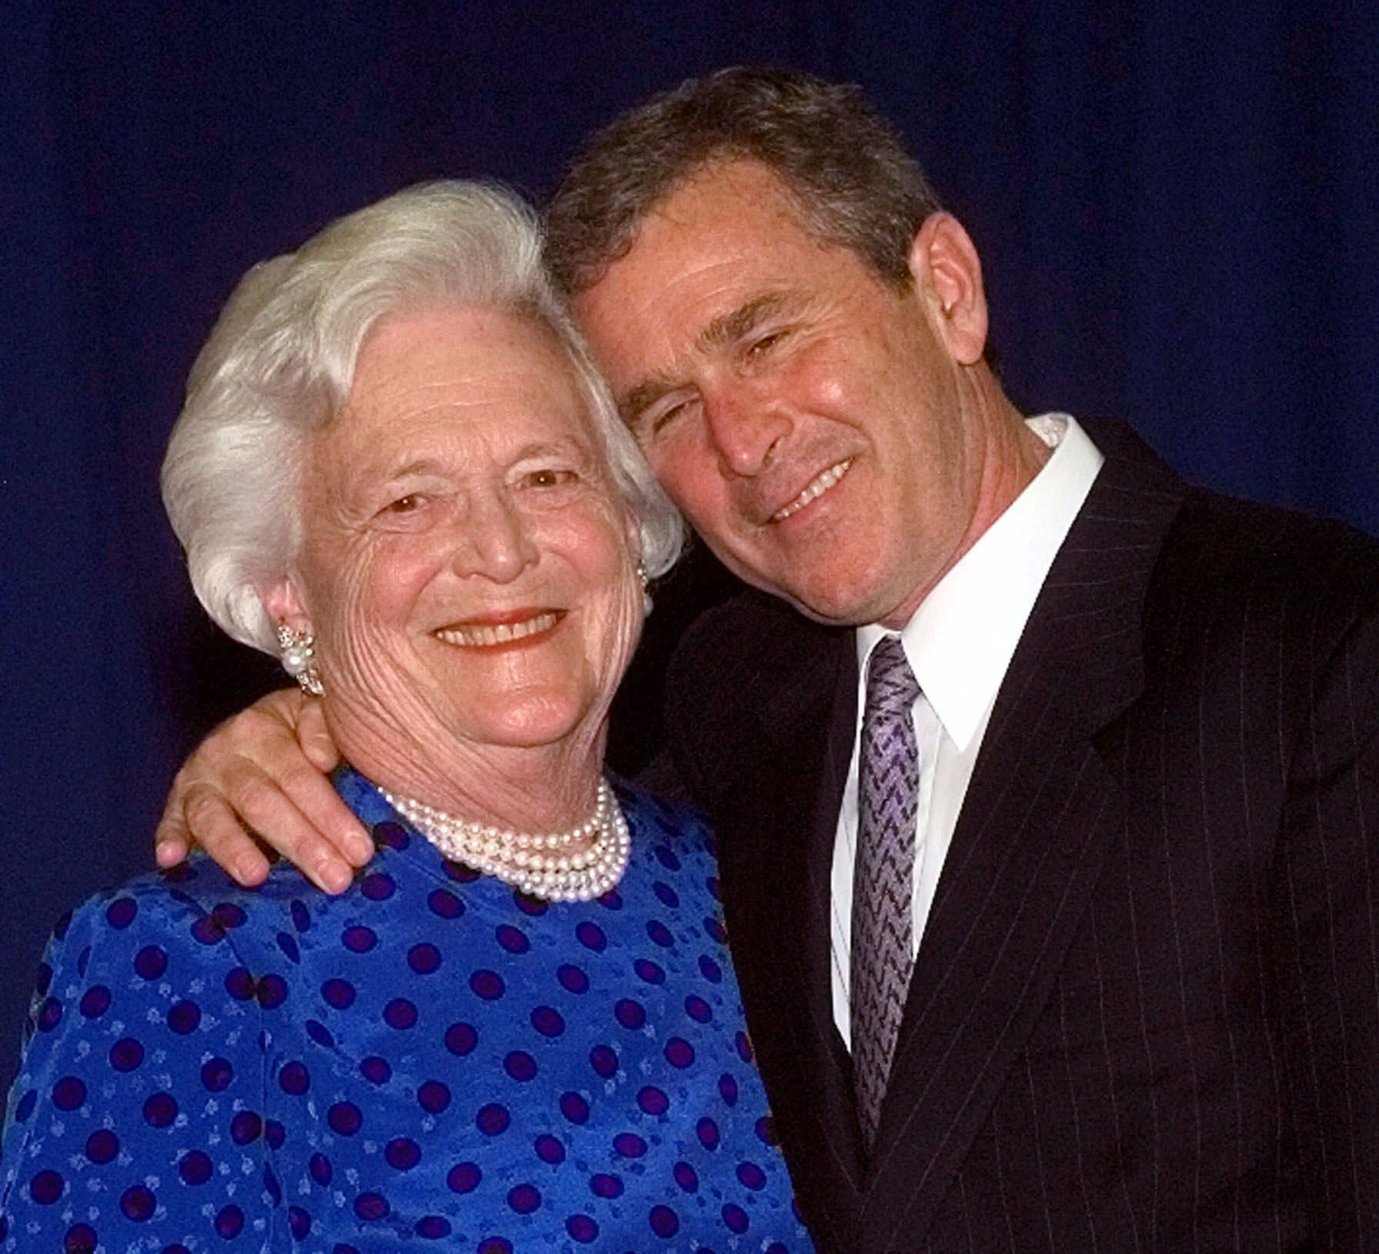 Texas Gov. George W. Bush, right, gives his mother, Barbara Bush , a hug after taking a family photo Thursday, June 10, 1999 in Houston. The Bush family gathered to celebrate former president George Bush and Barbara's birthdays. George Bush will turn 75 Saturday and Barbara turned 74 Tuesday. (AP Photo/David J. Phillip)